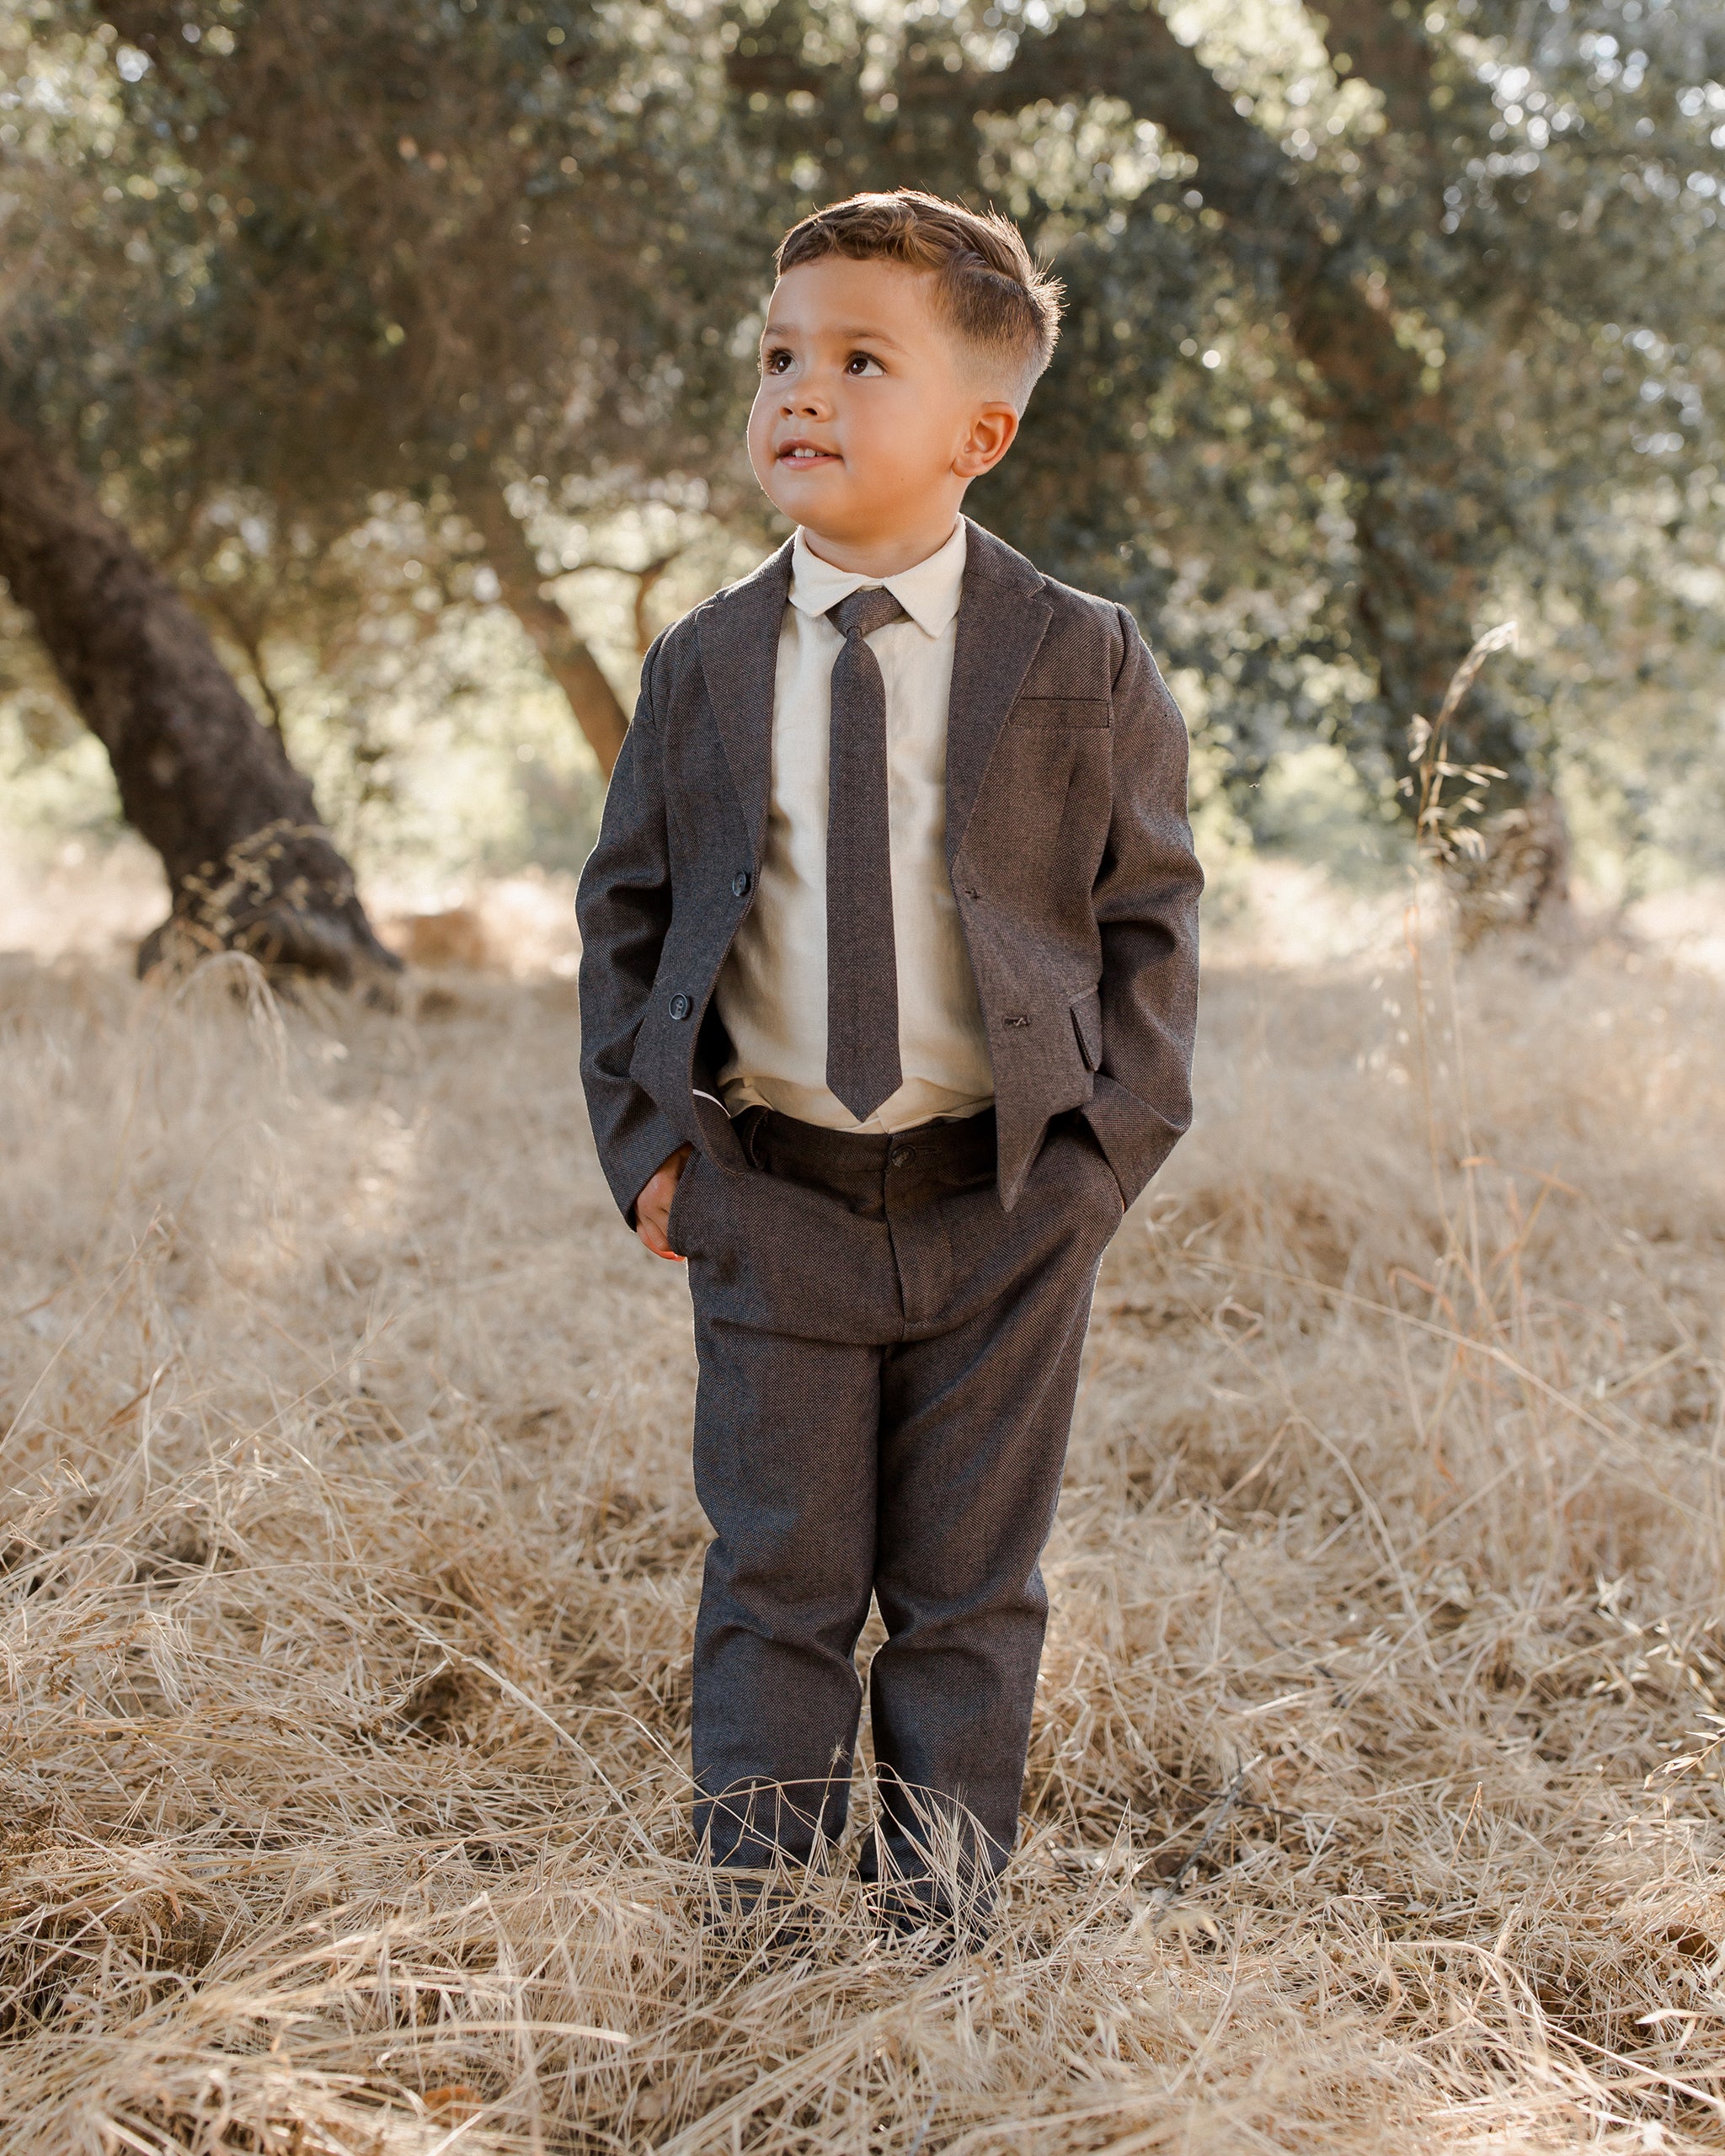 Skinny Tie || Black - Rylee + Cru | Kids Clothes | Trendy Baby Clothes | Modern Infant Outfits |